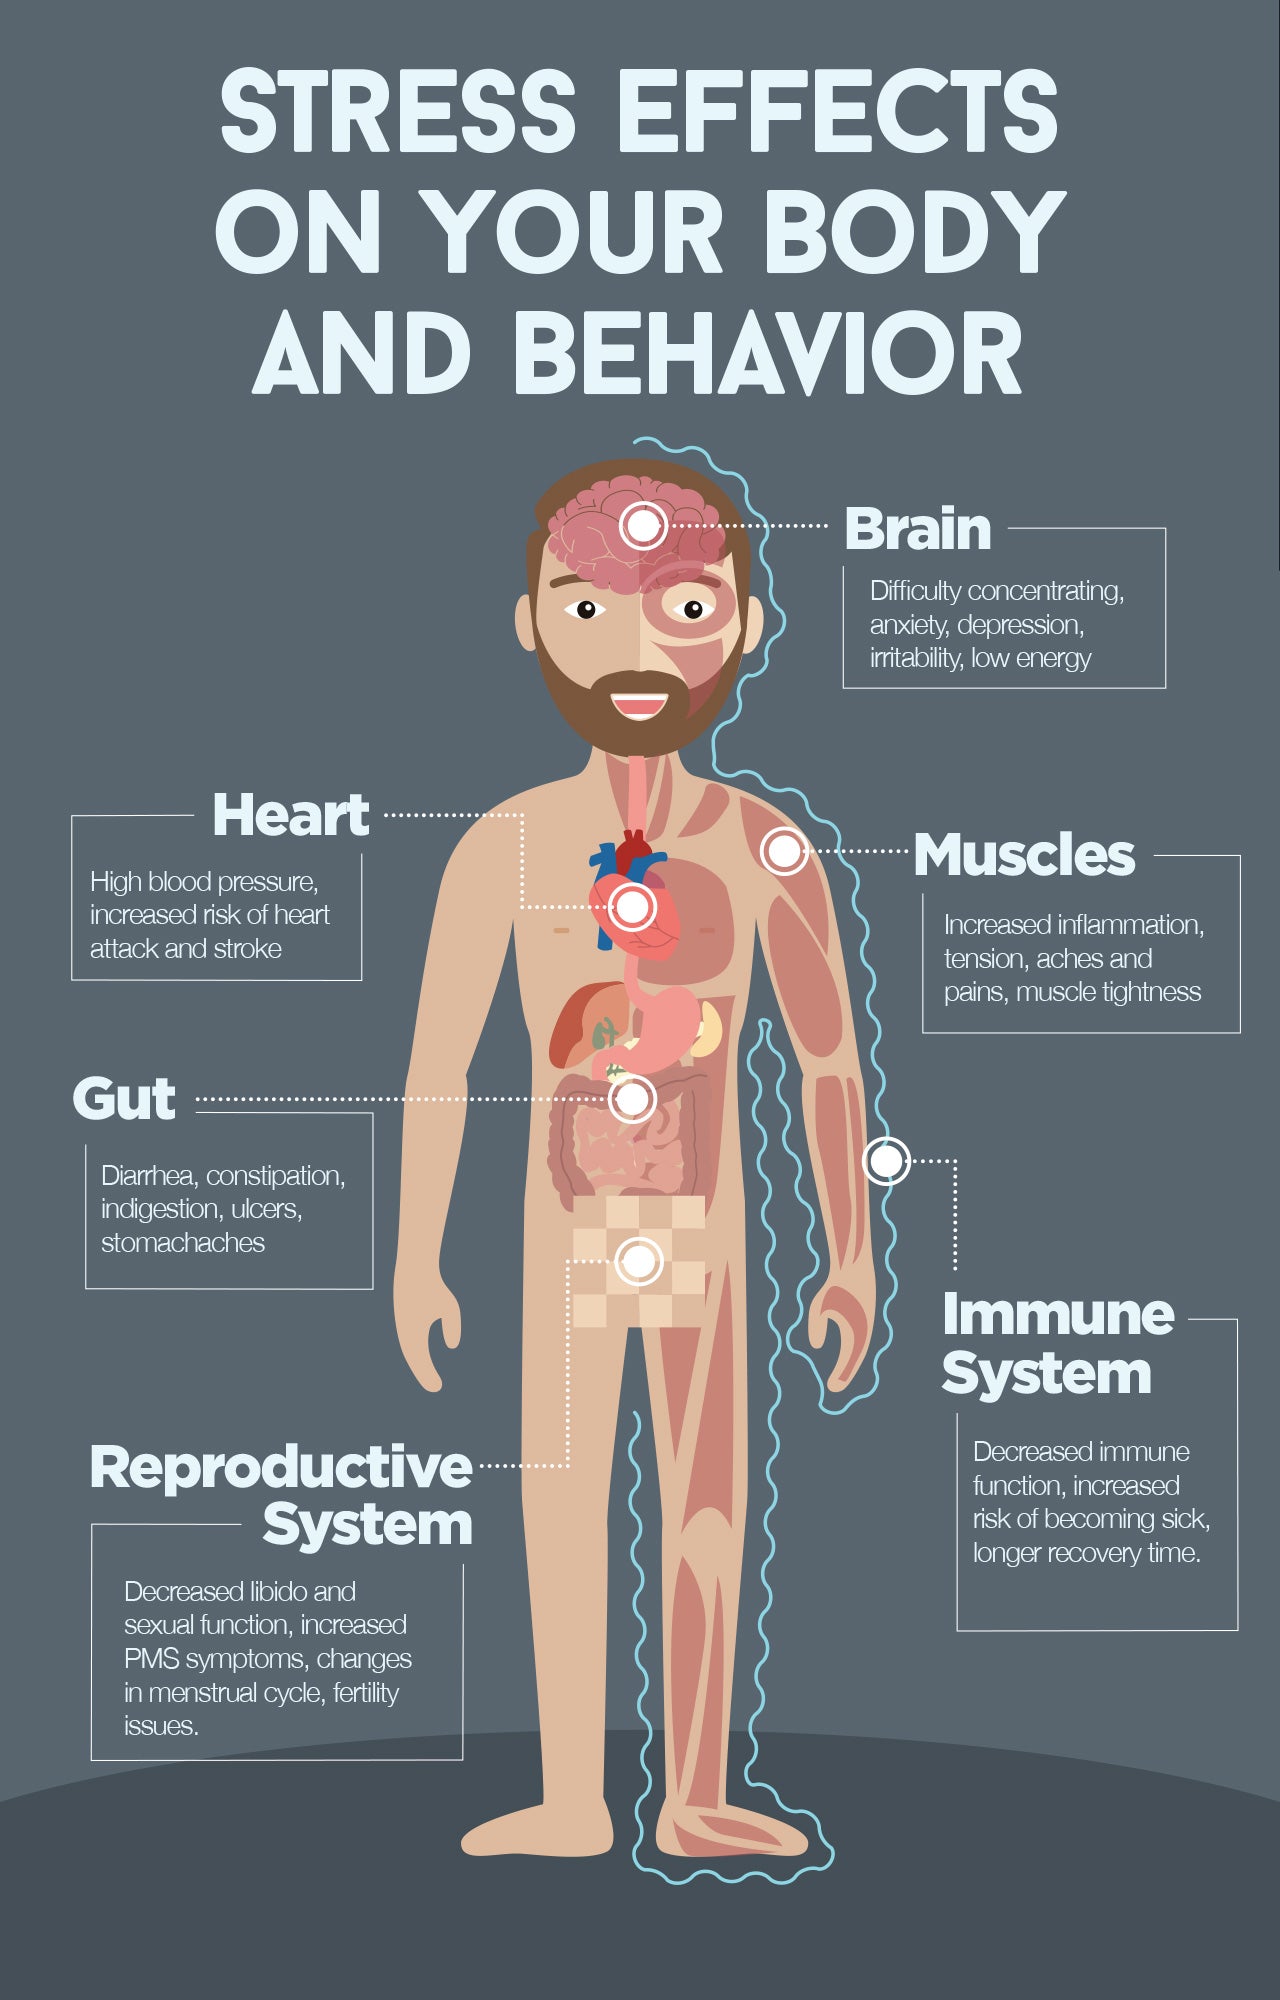 Stress effects on your body and behavior